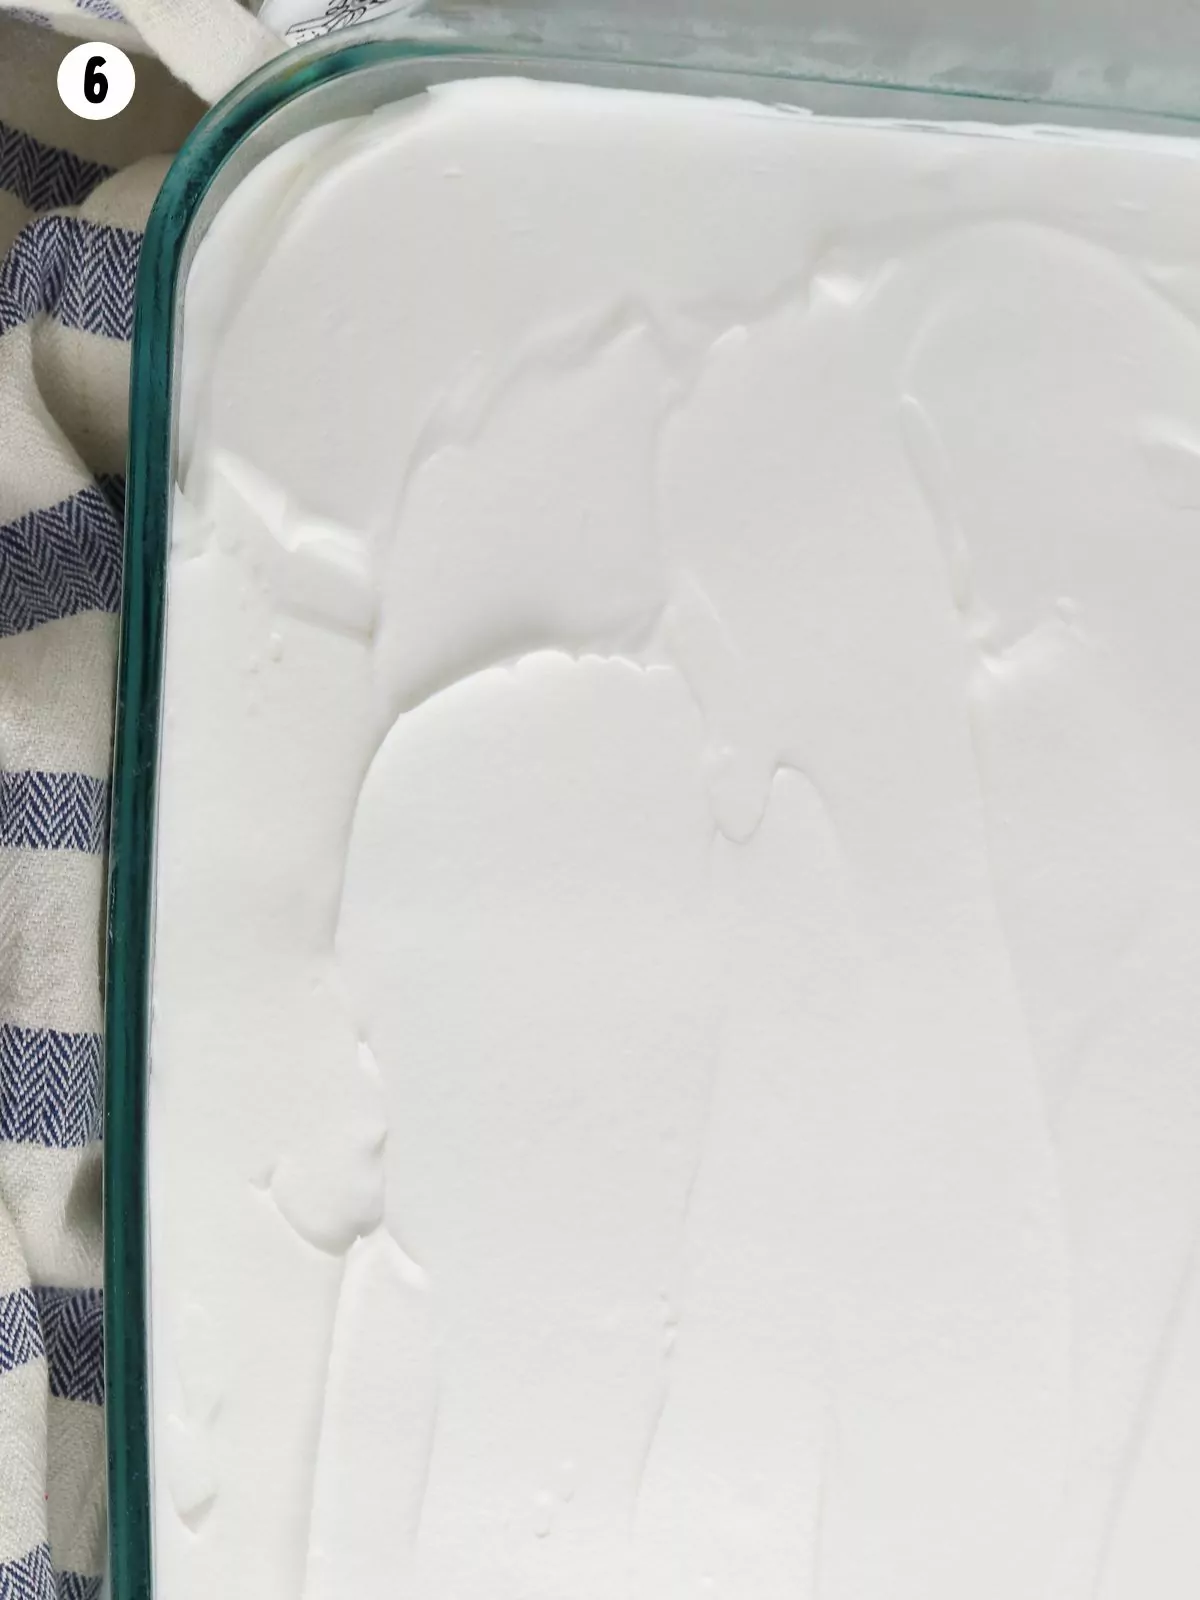 Cool Whip whipped topping spread on baked cake.